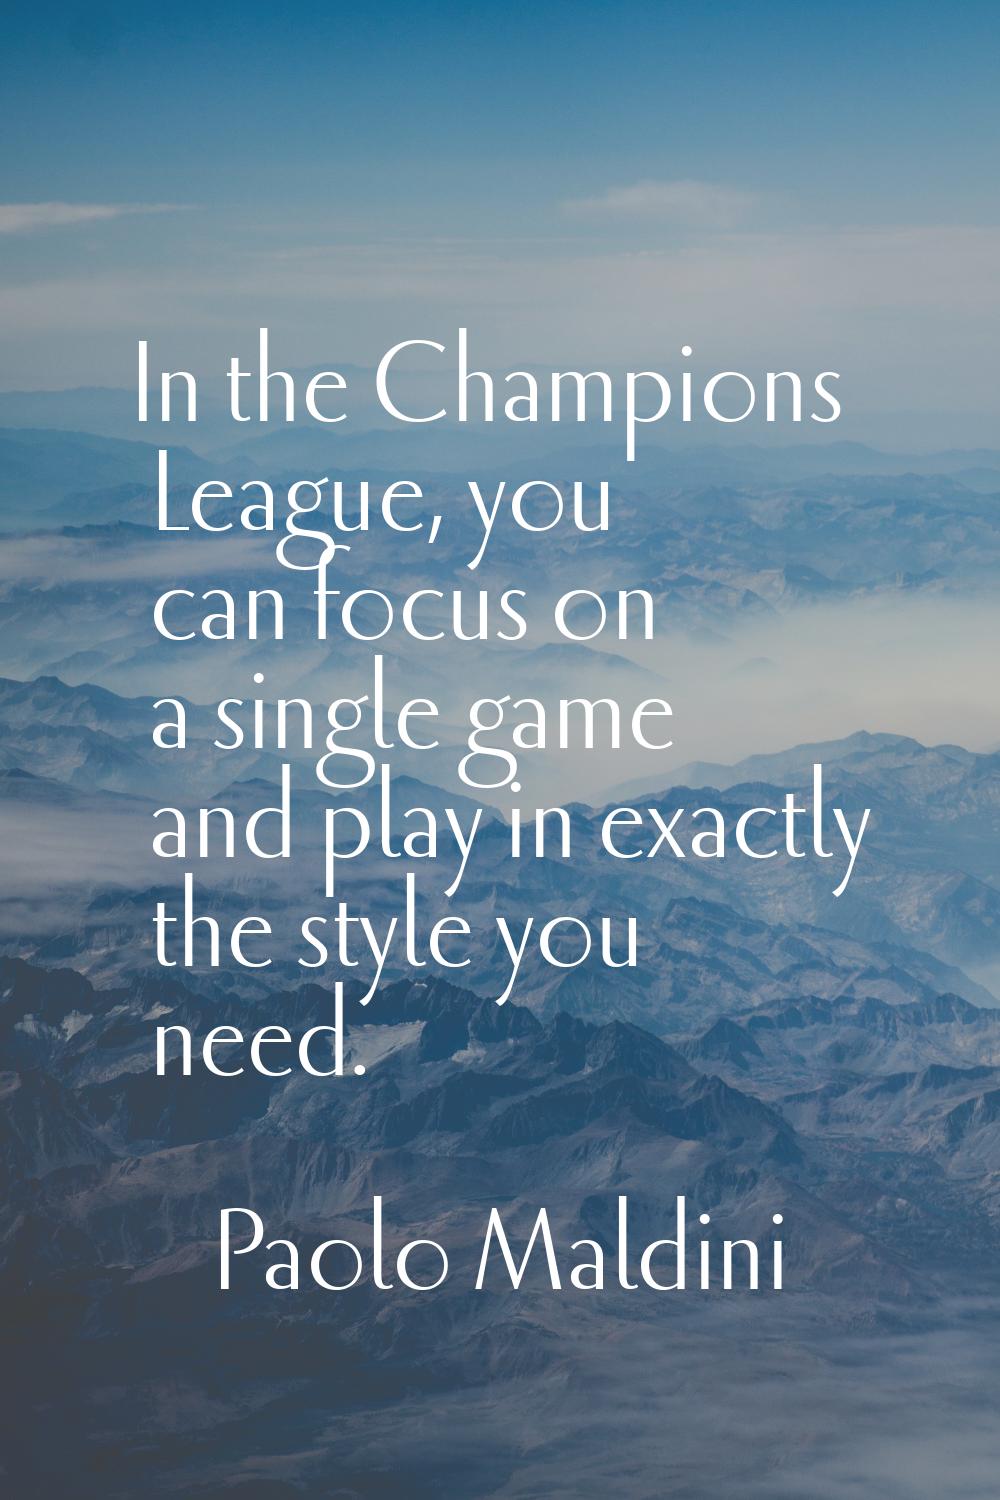 In the Champions League, you can focus on a single game and play in exactly the style you need.